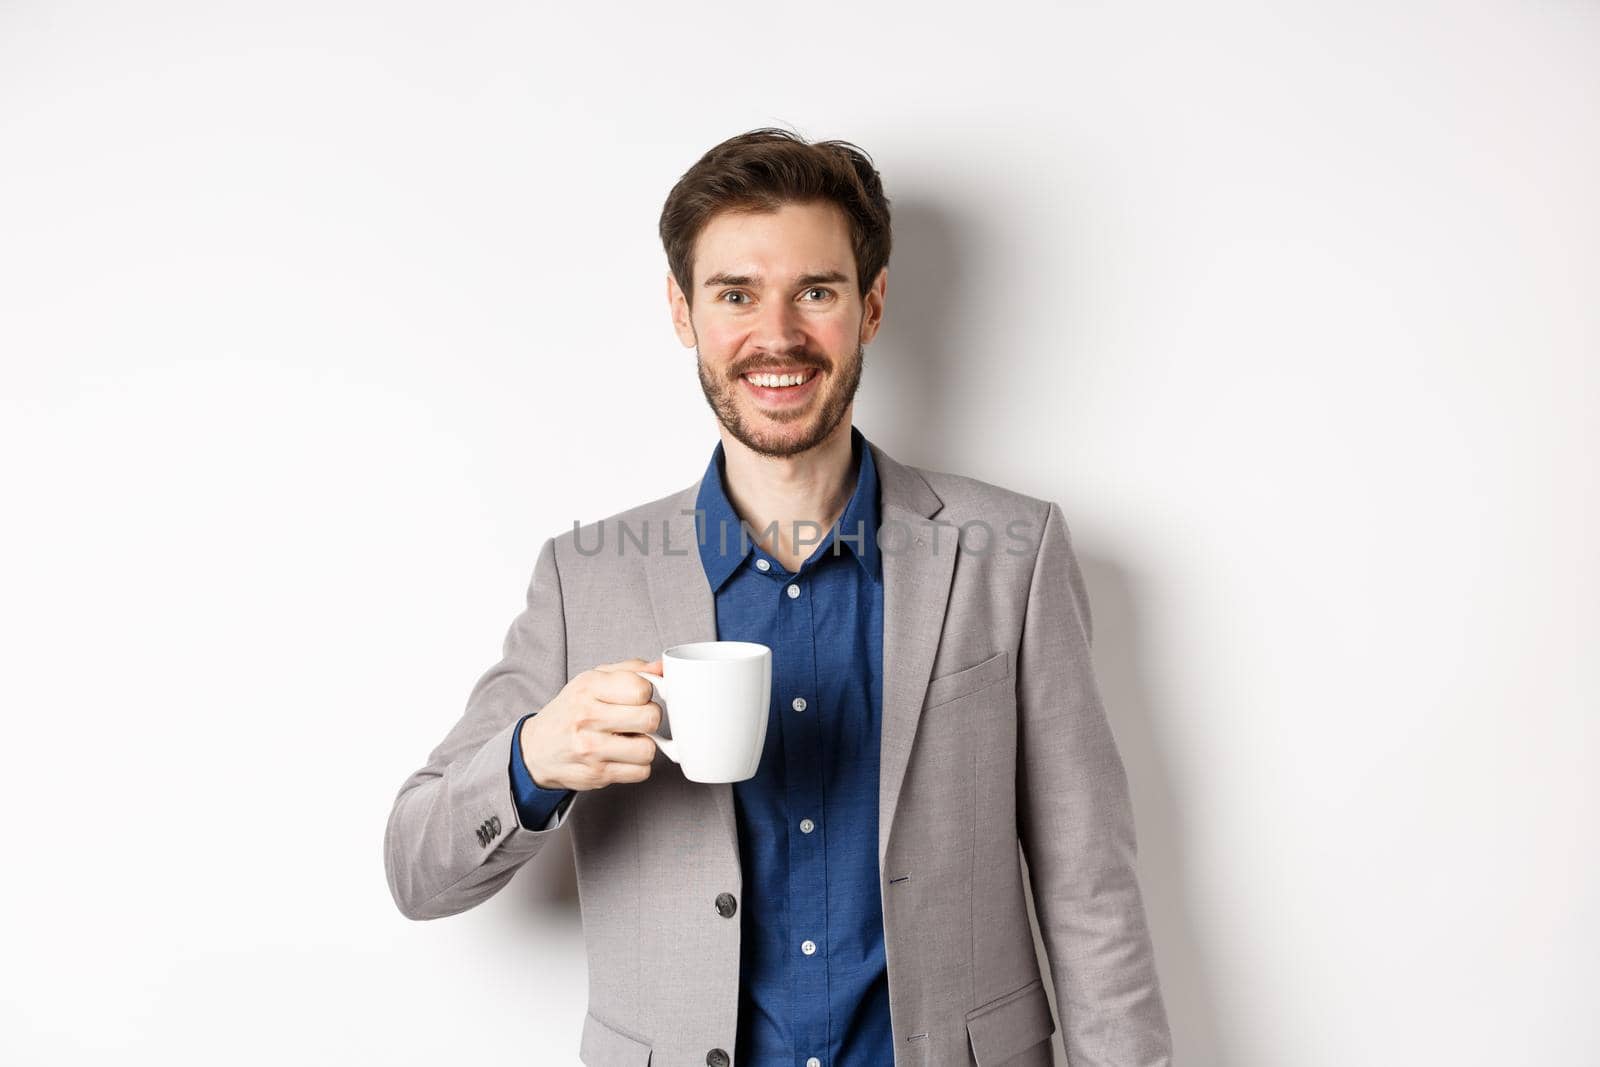 Handsome businessman in suit drinking coffee or tea from office mug, smiling enthusiastic at camera, standing against white background.